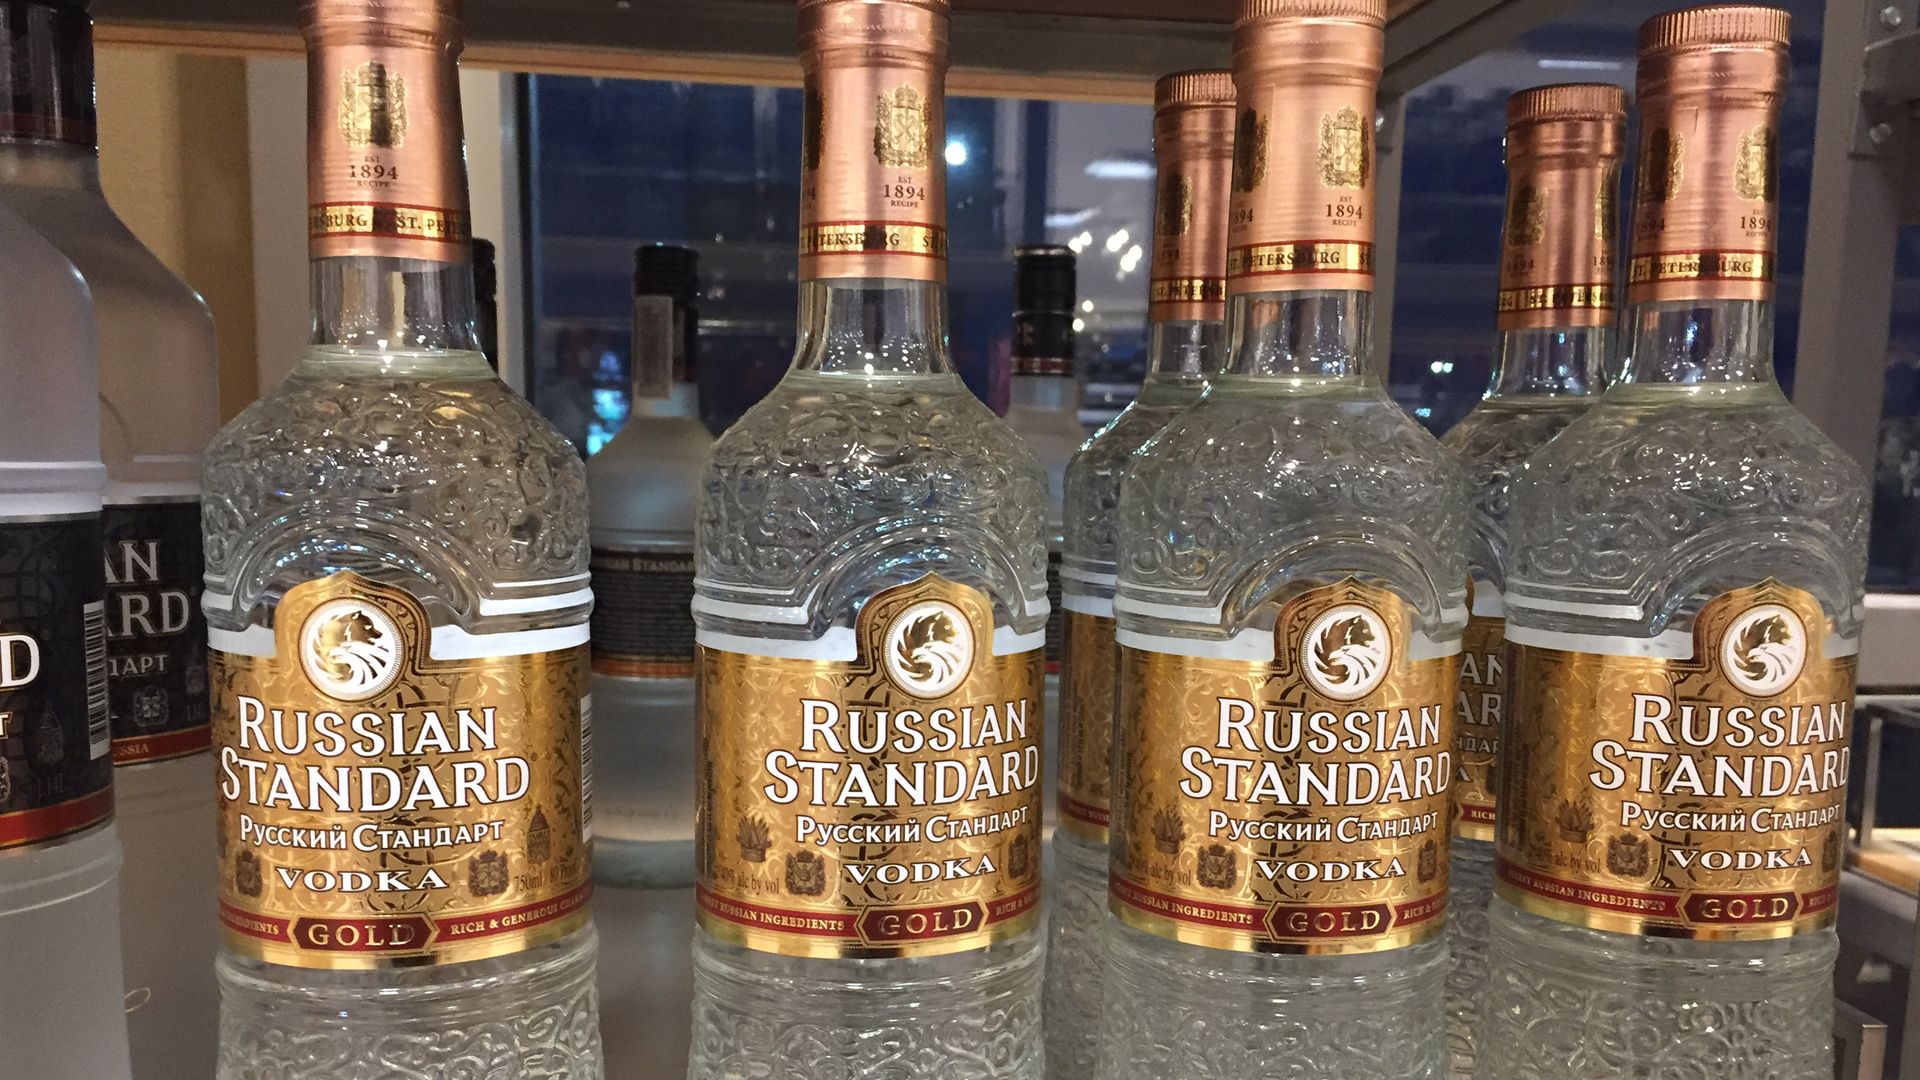 Bottles of Russian Standard Vodka seen on the shelf of a store in Toronto, Ontario, Canada.  